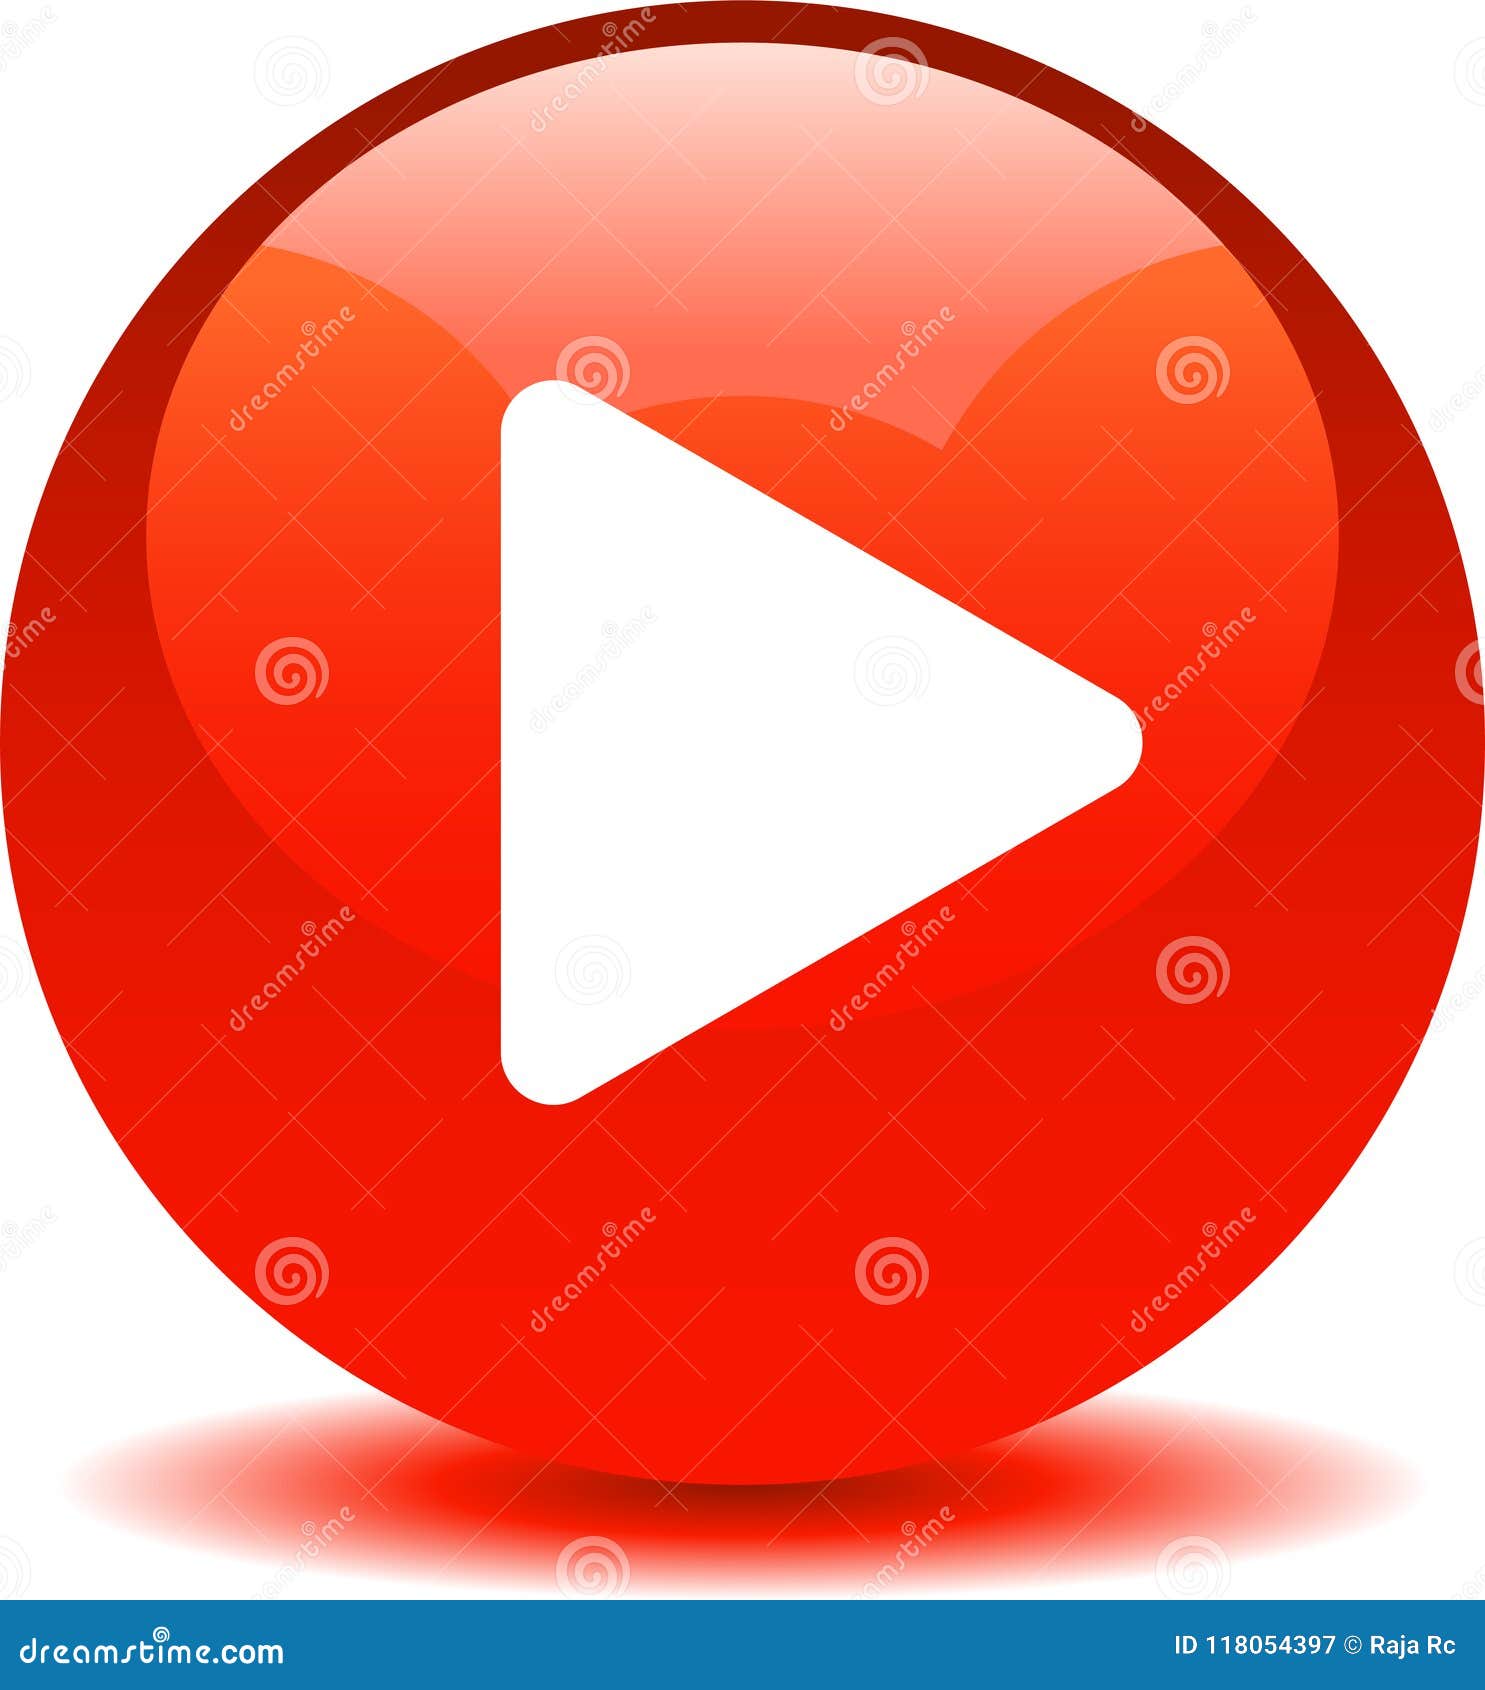 play button web audio icon red